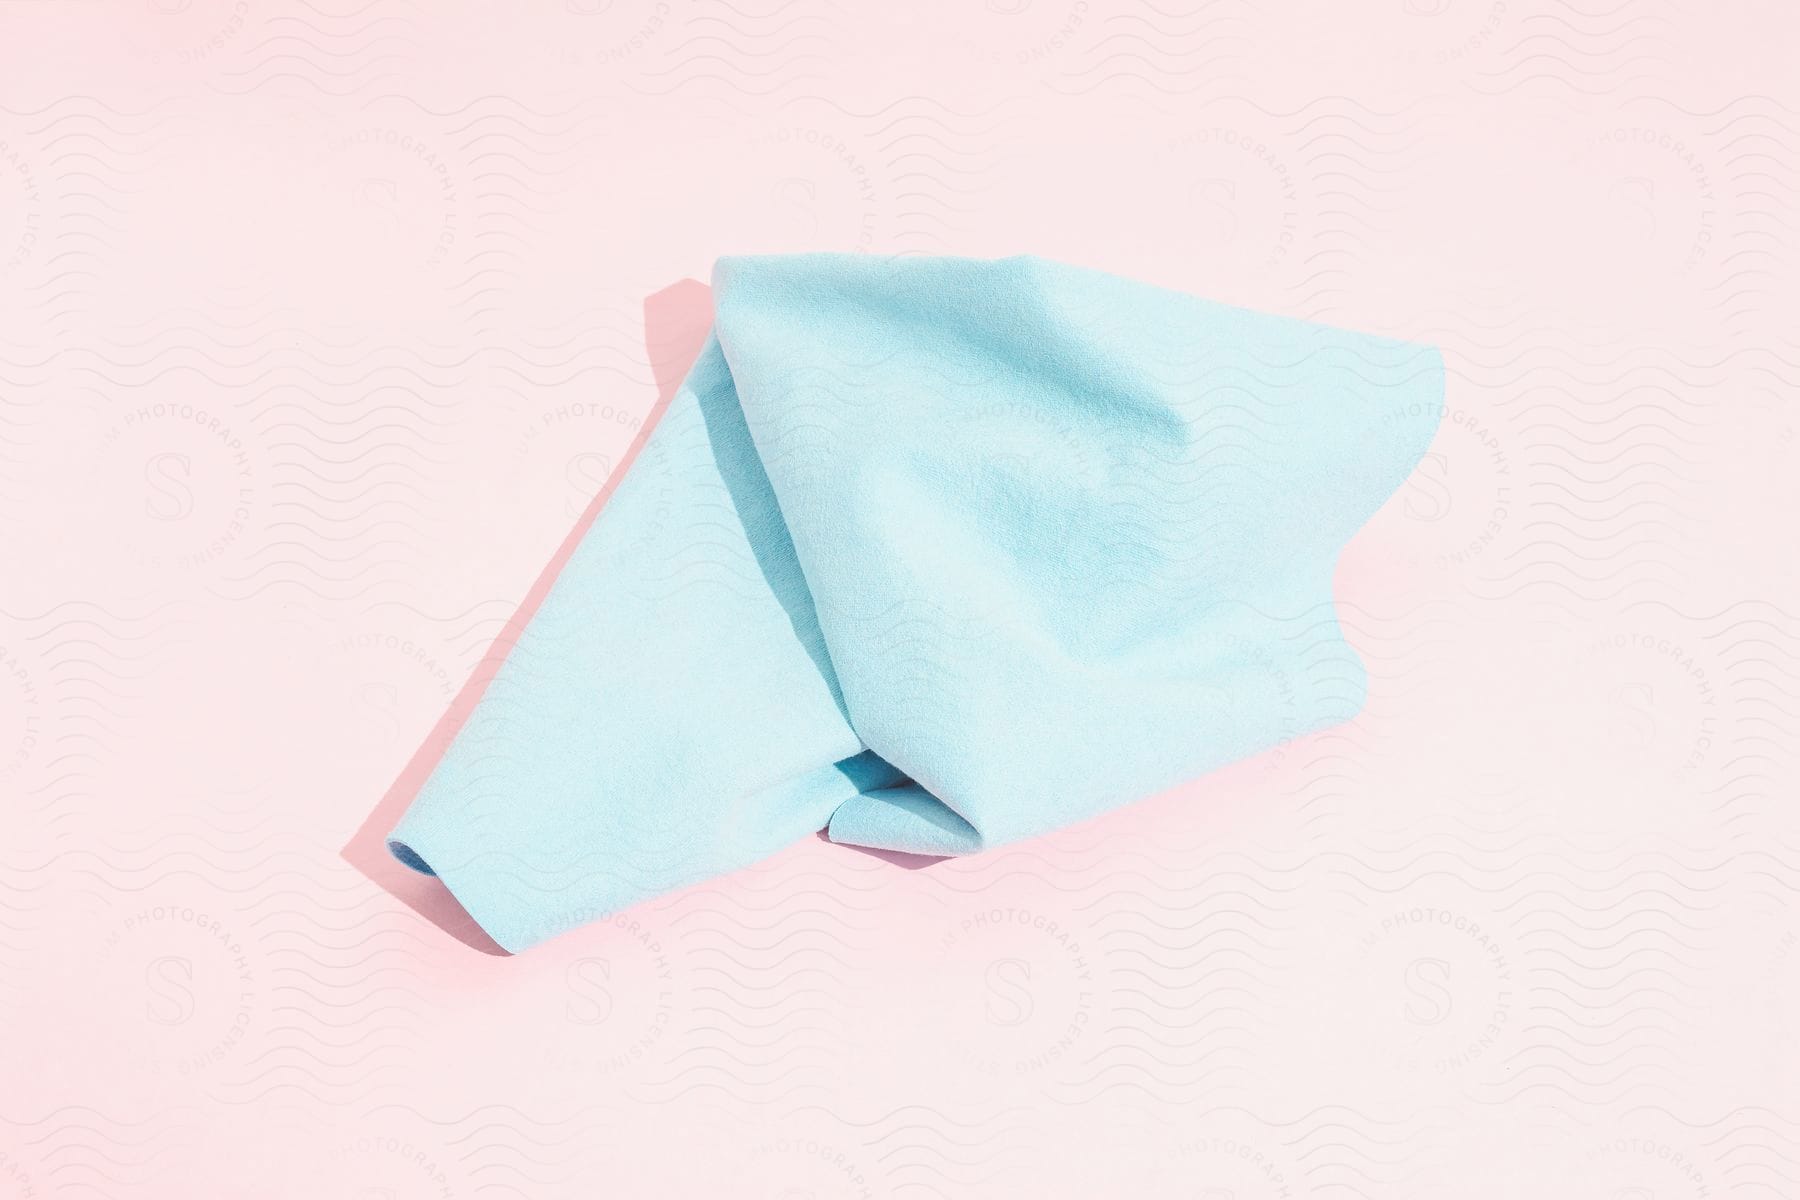 A blue cloth laid on a pink surface casting a shadow on it